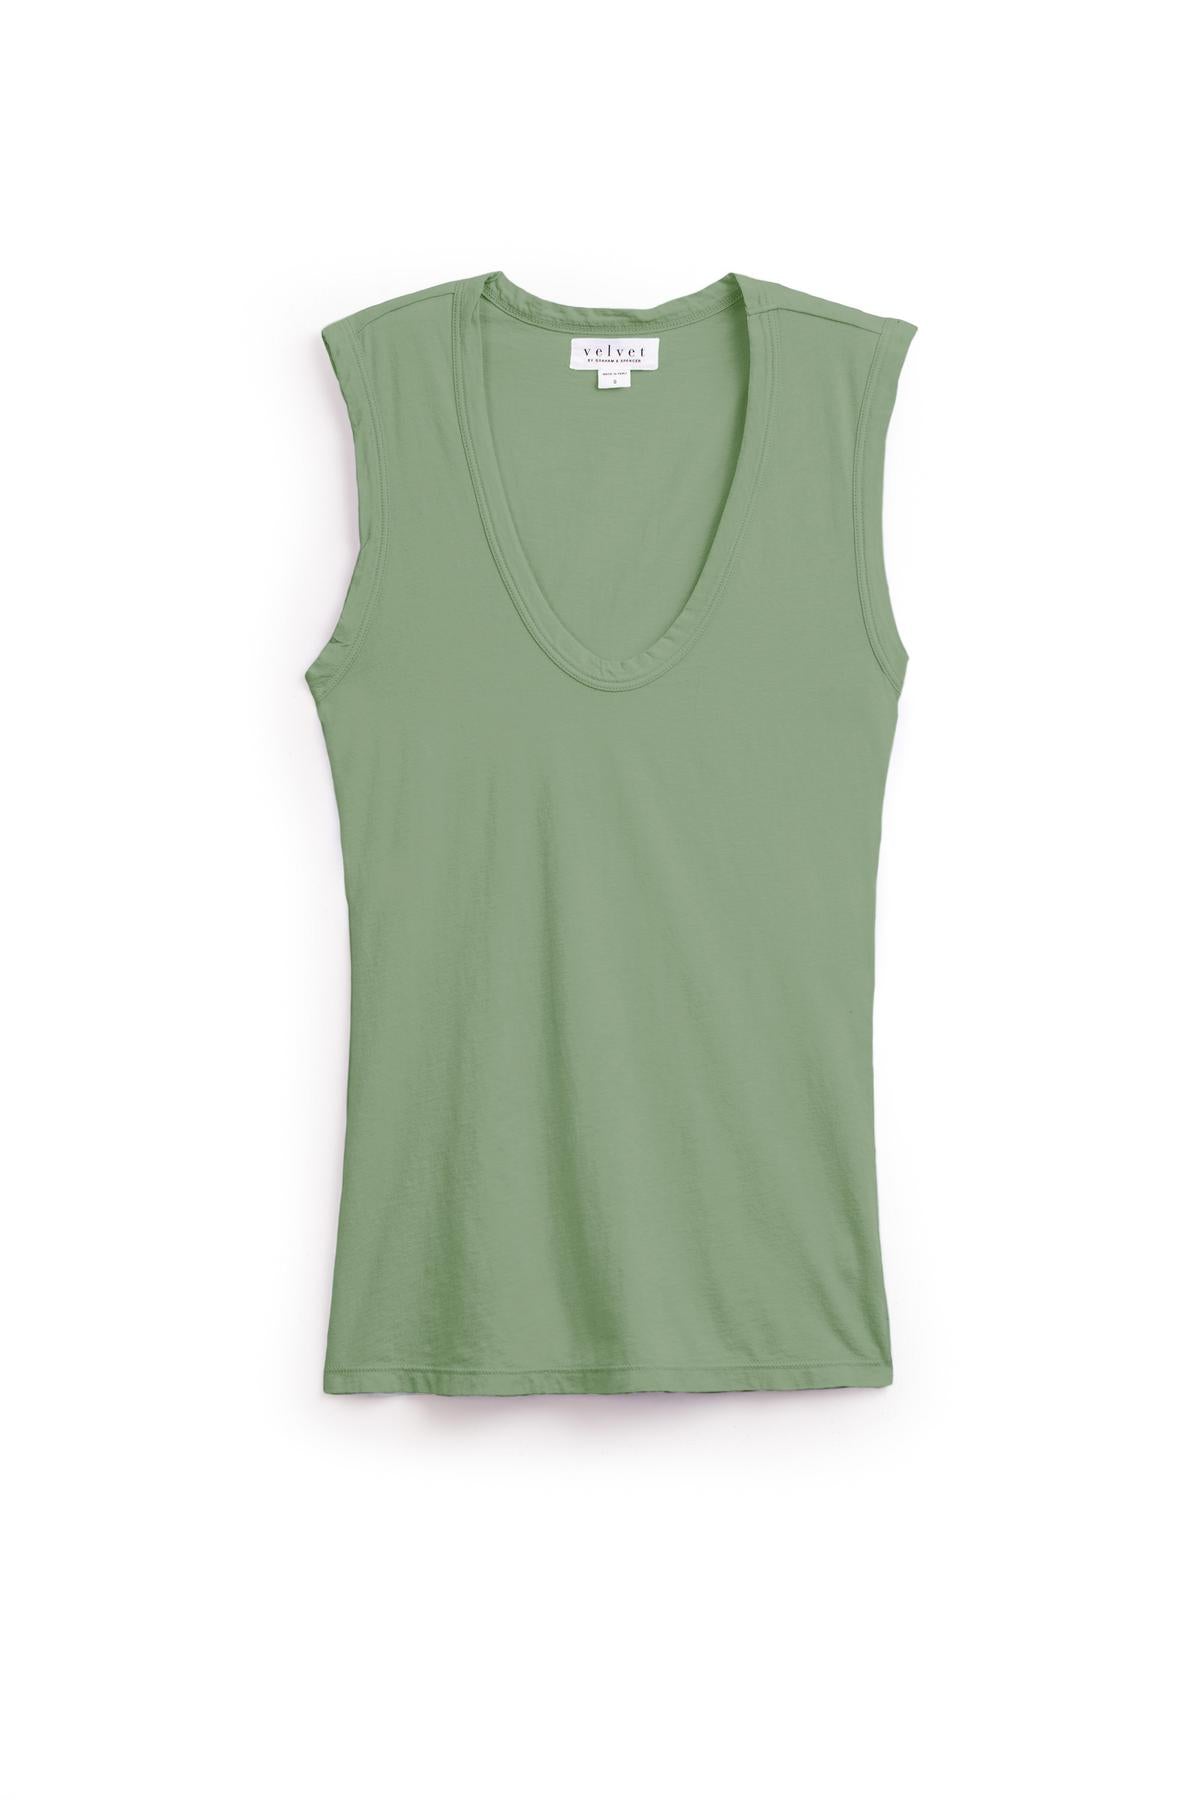 A soft and wearable Velvet by Graham & Spencer ESTINA GAUZY WHISPER FITTED TANK TOP in aloe green on a white background.-36131064185025